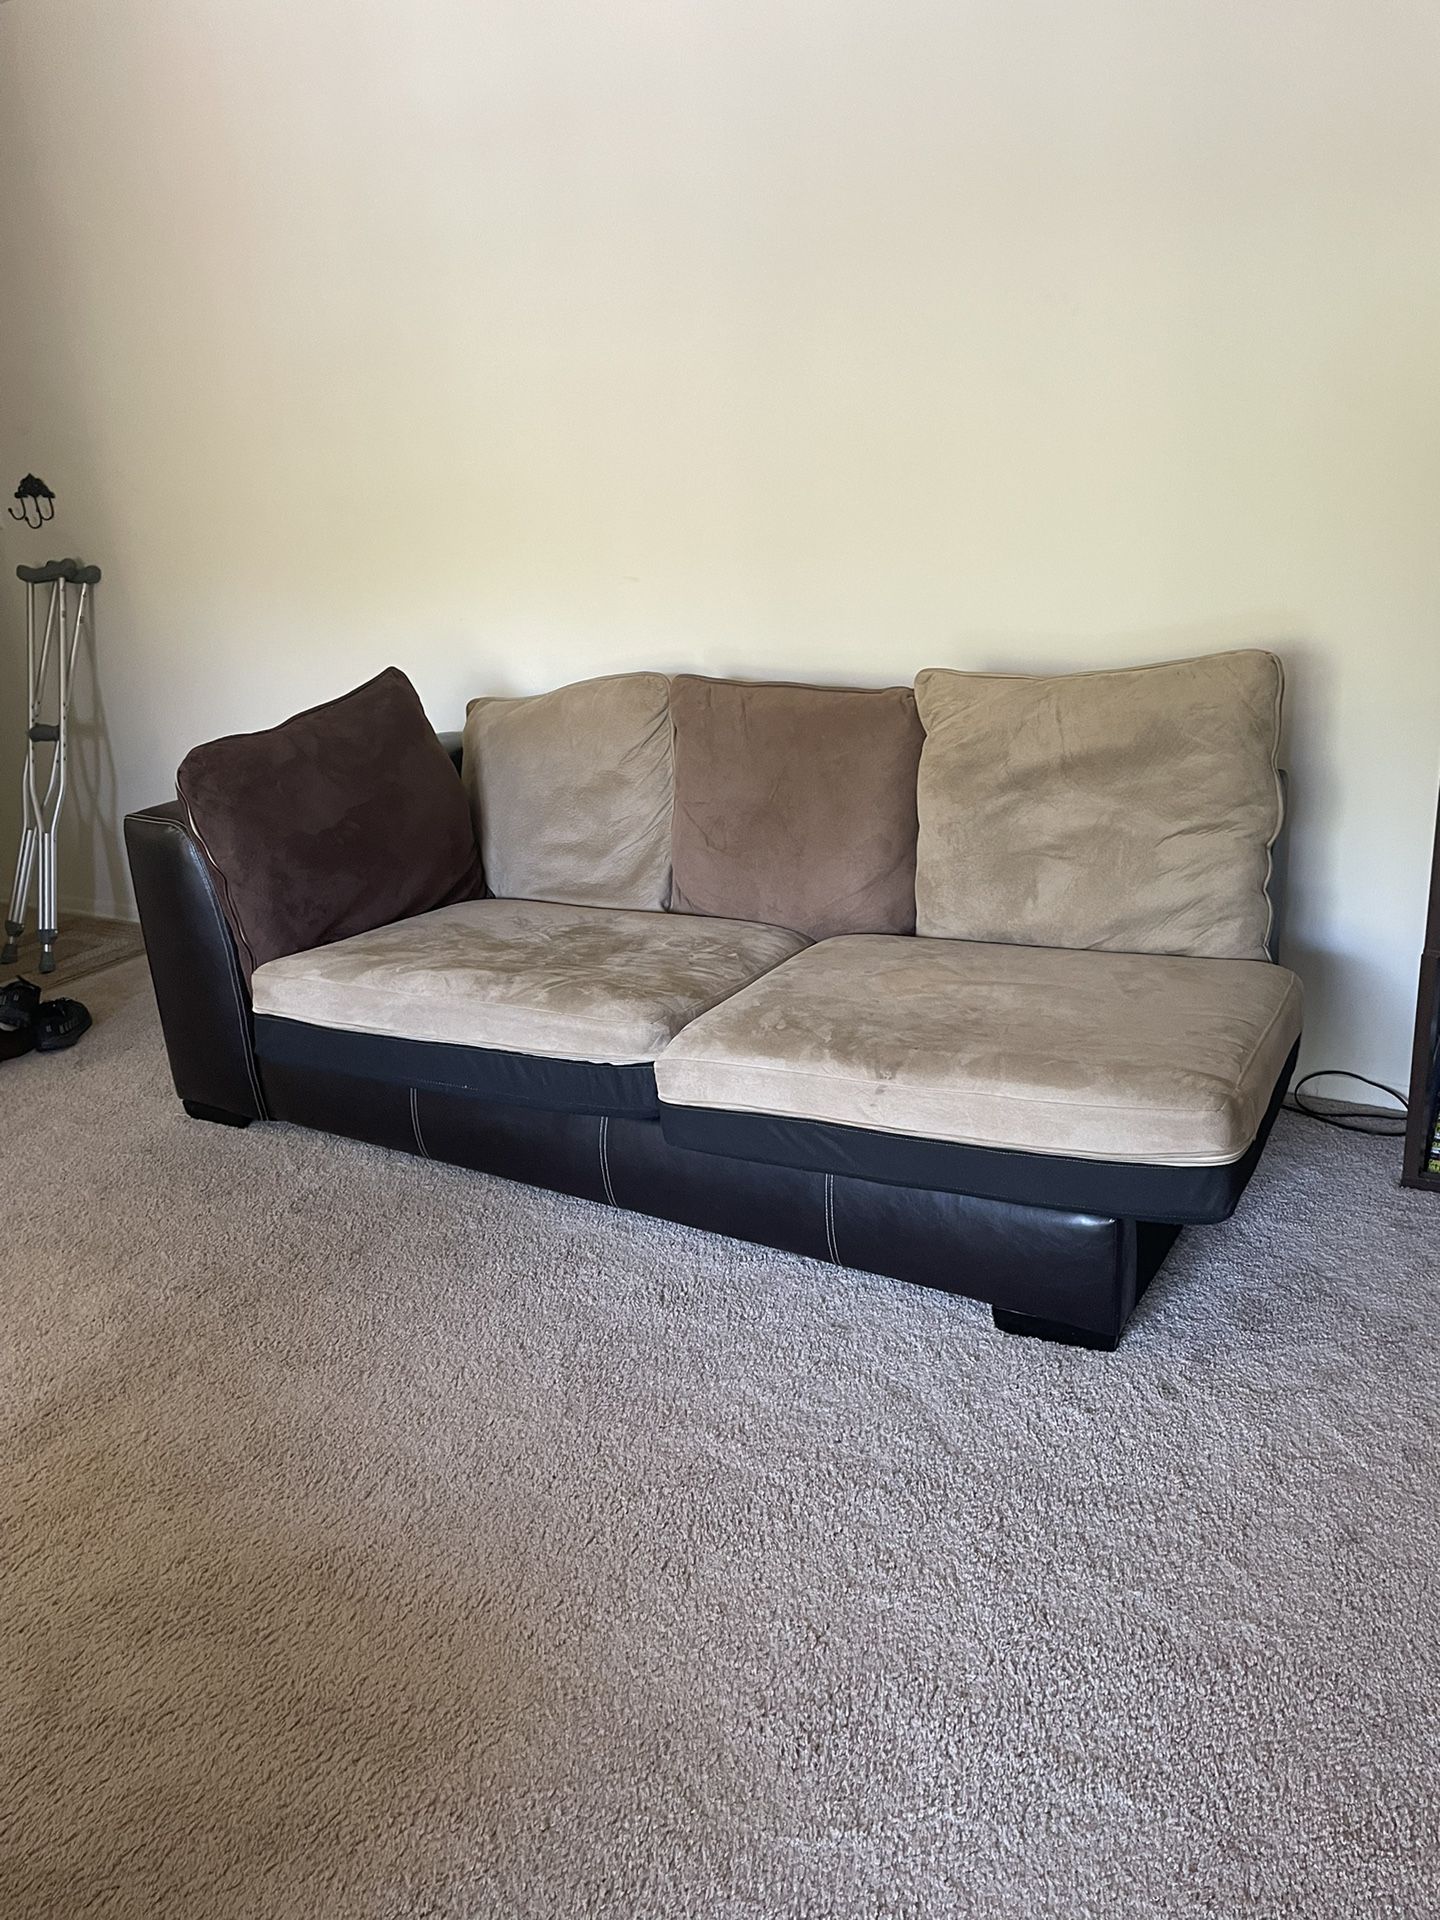 Sectional Couch $25